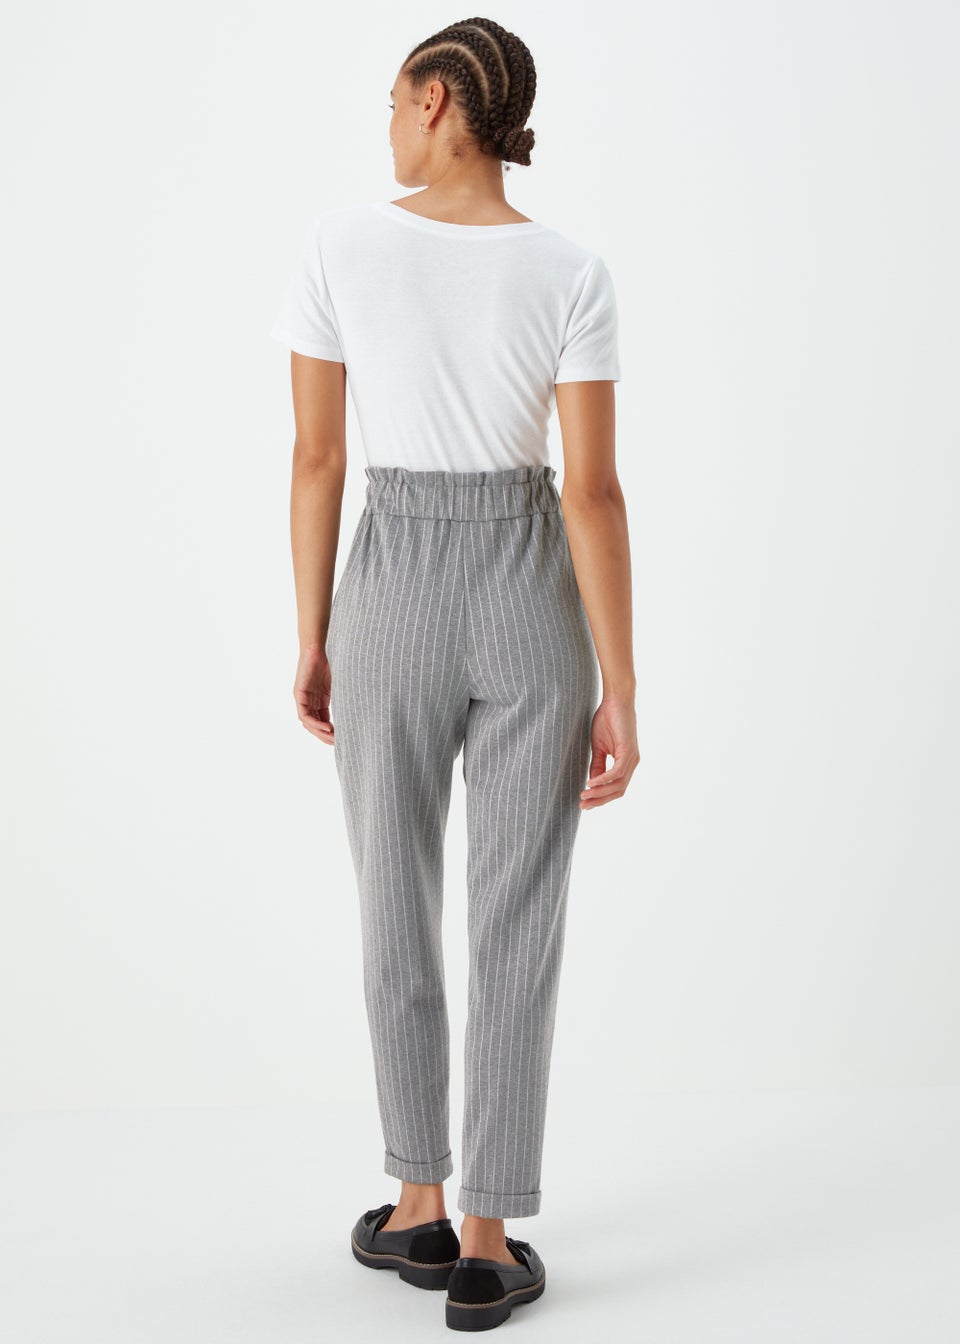 Grey & White Paperbag Trousers